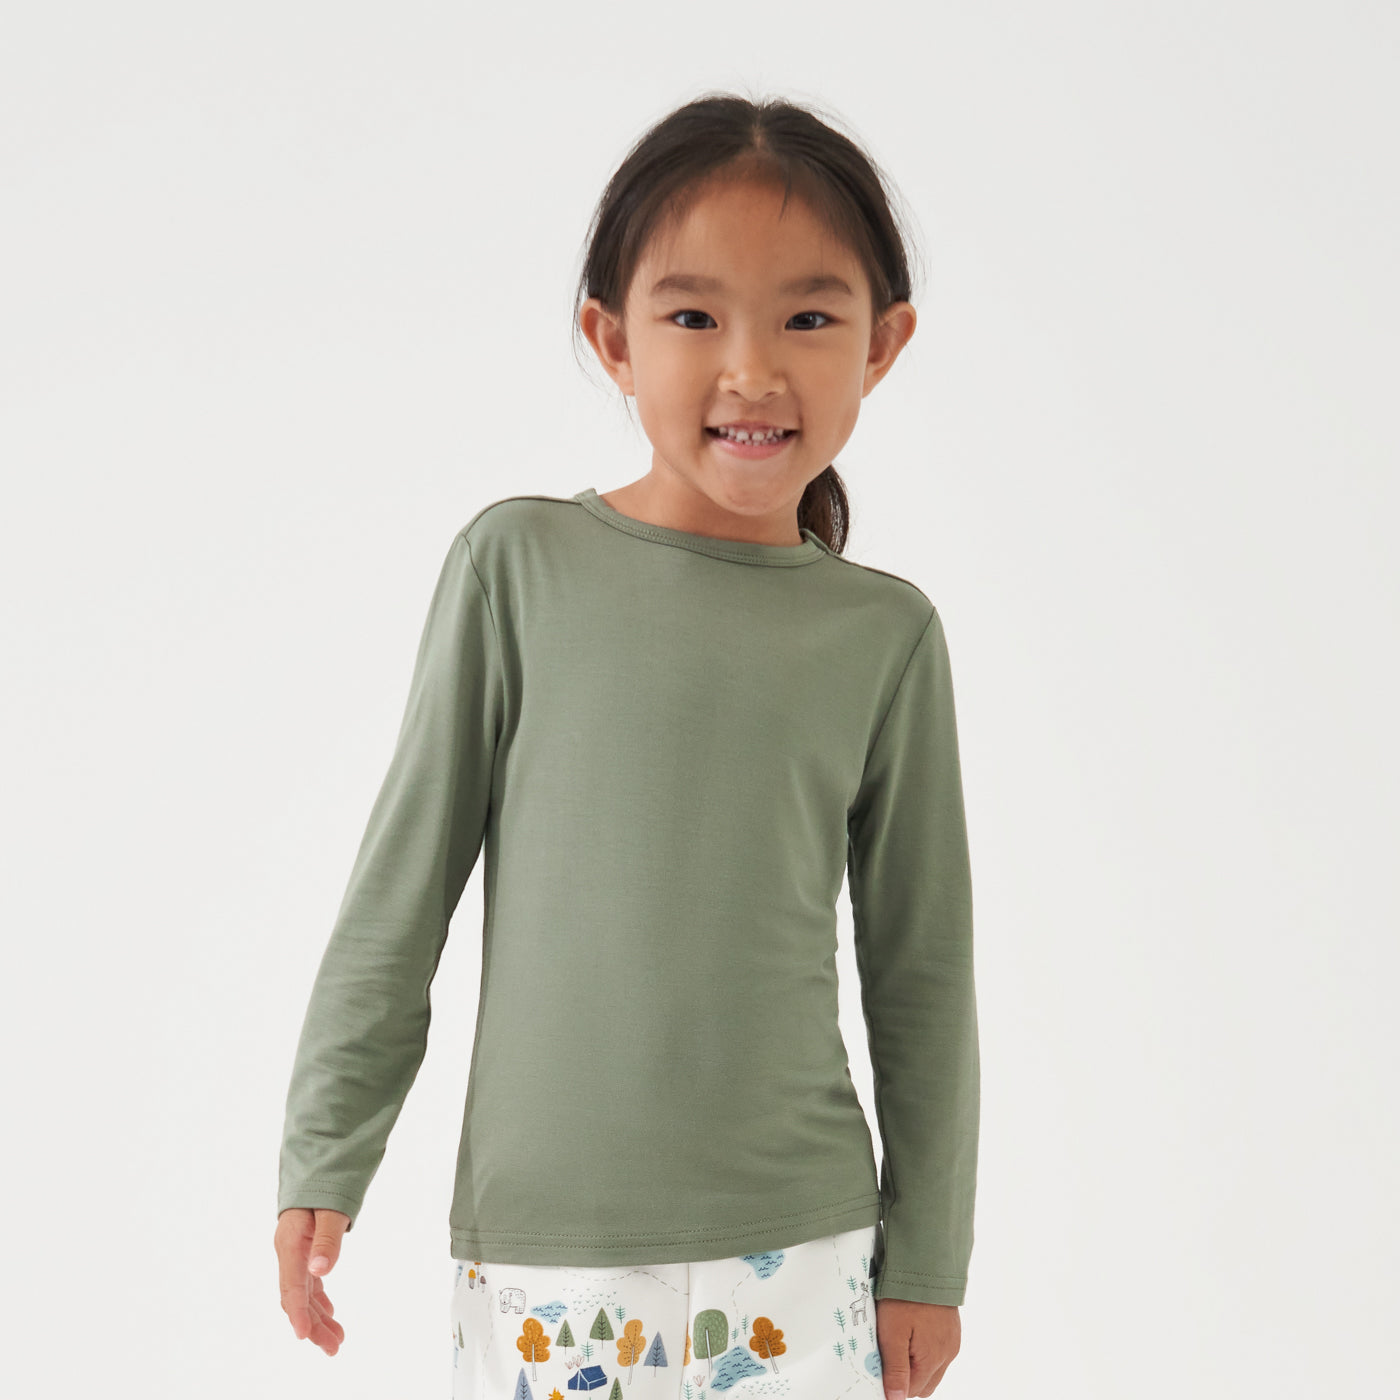 Alternate image of a child wearing a Moss classic tee